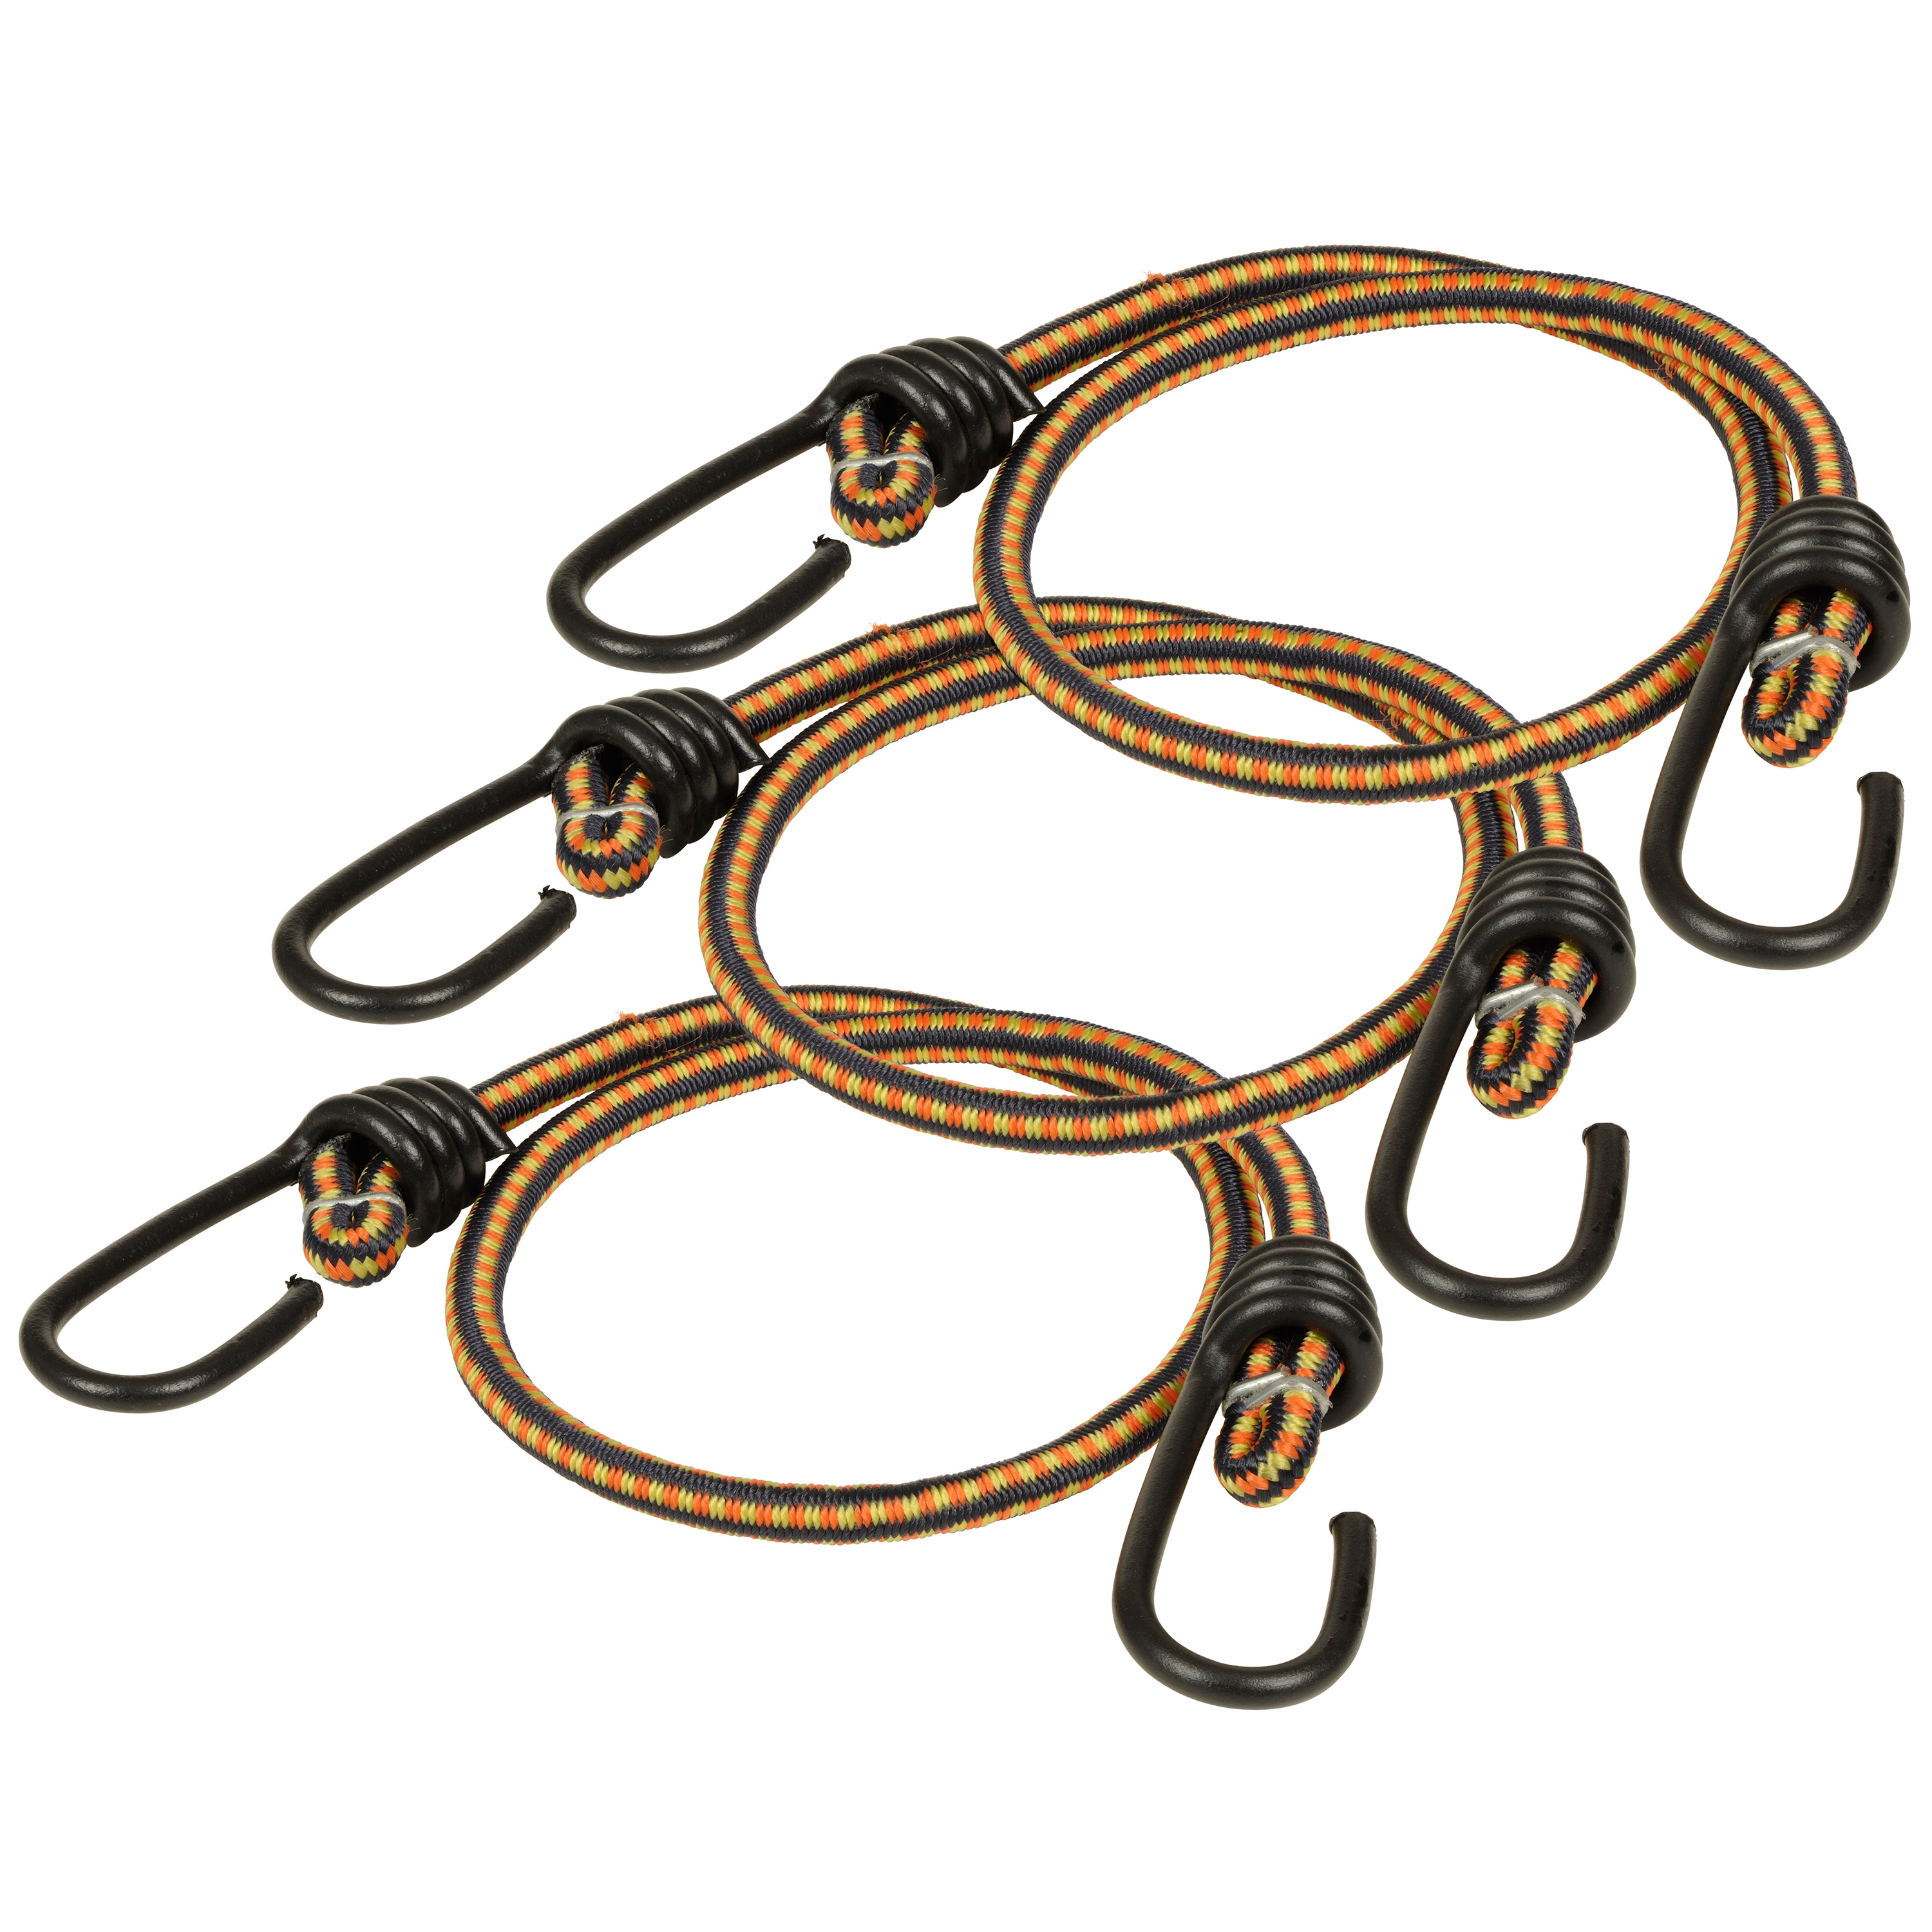 24" Bungee Cord, 3 Pack variant image view